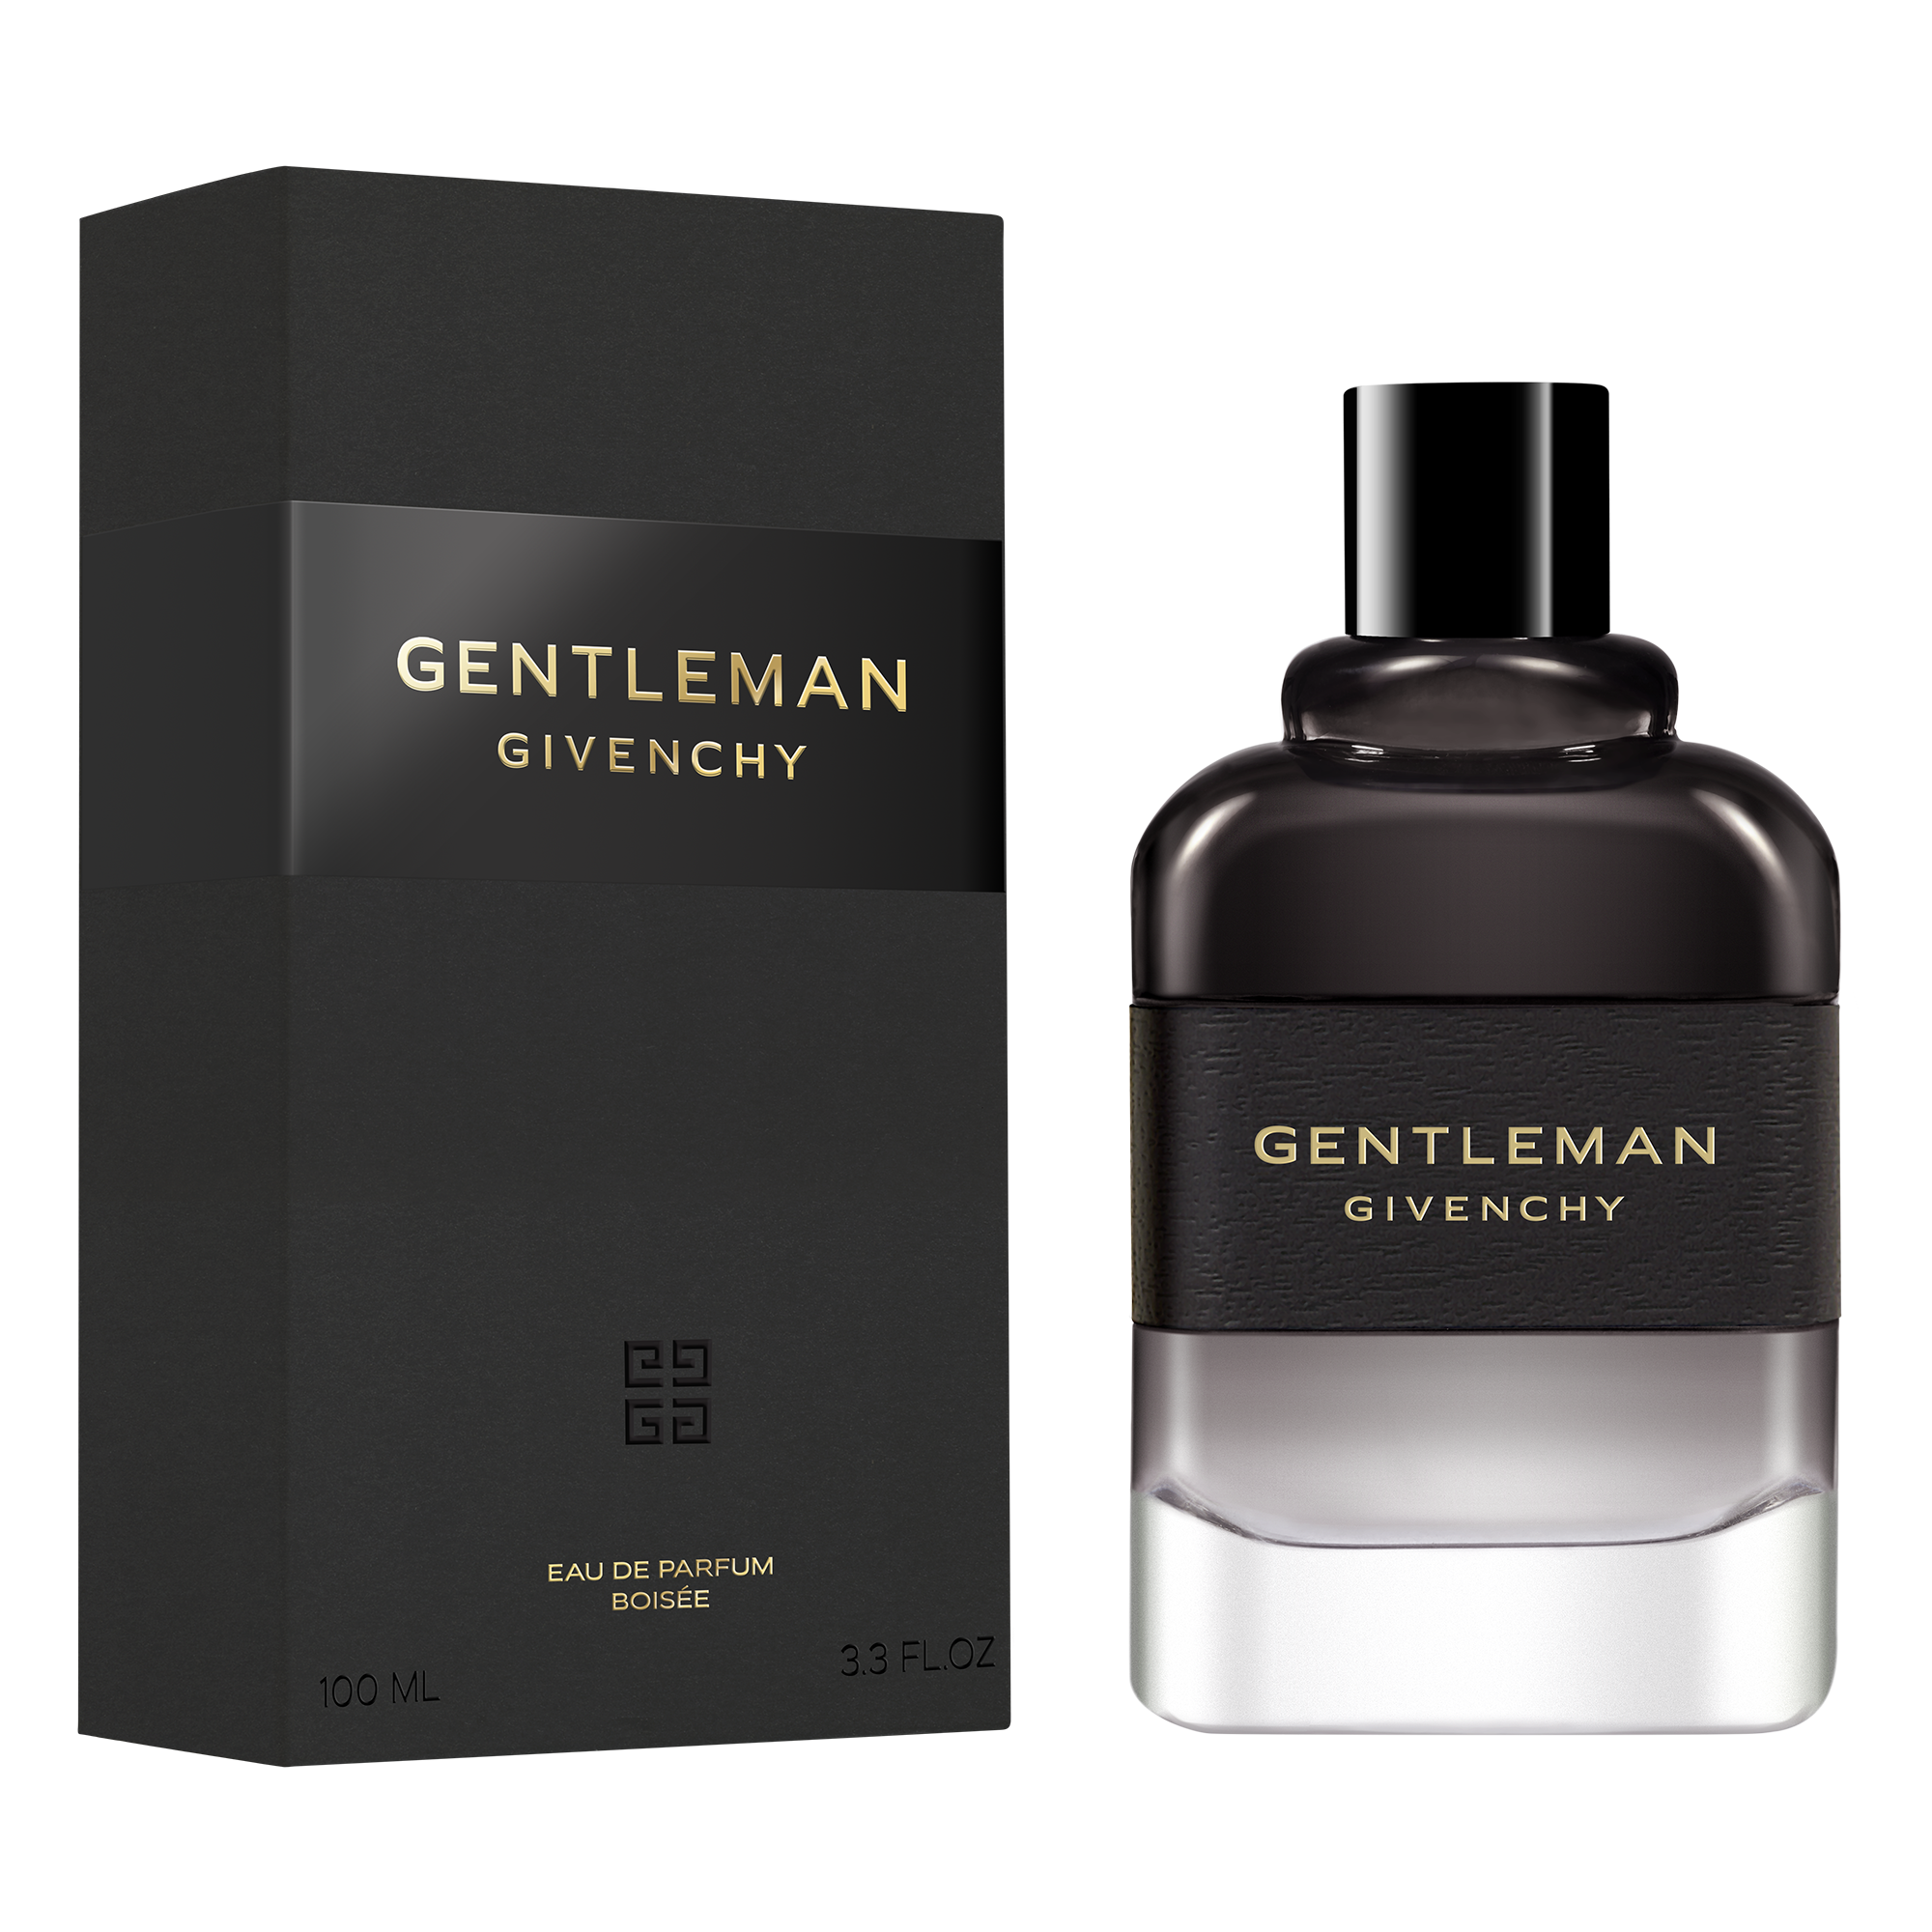 GENTLEMAN GIVENCHY ∷ GIVENCHY